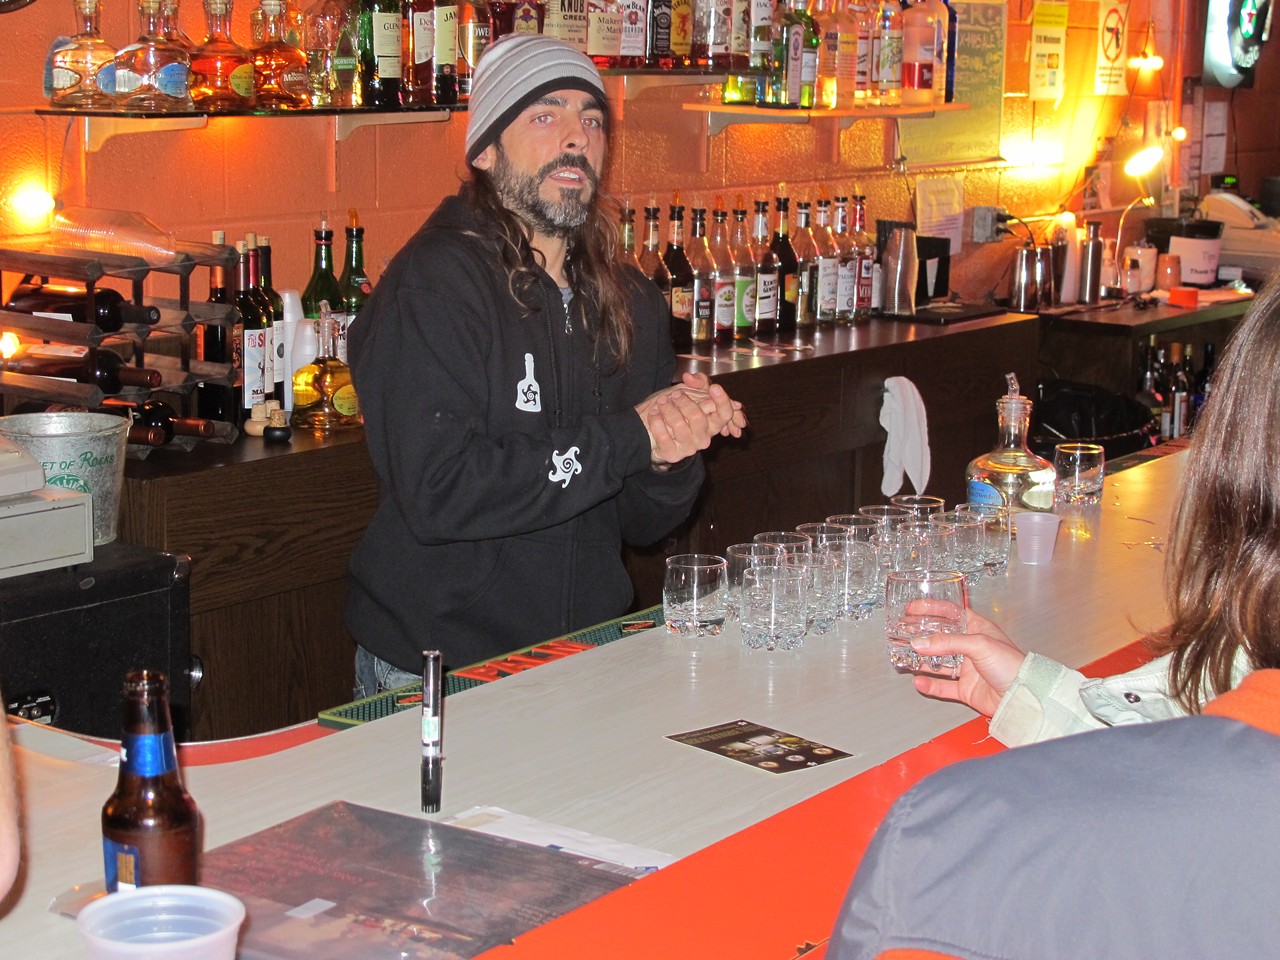 Photos from Last Night's VIP Tequila Tasting at the Beachland